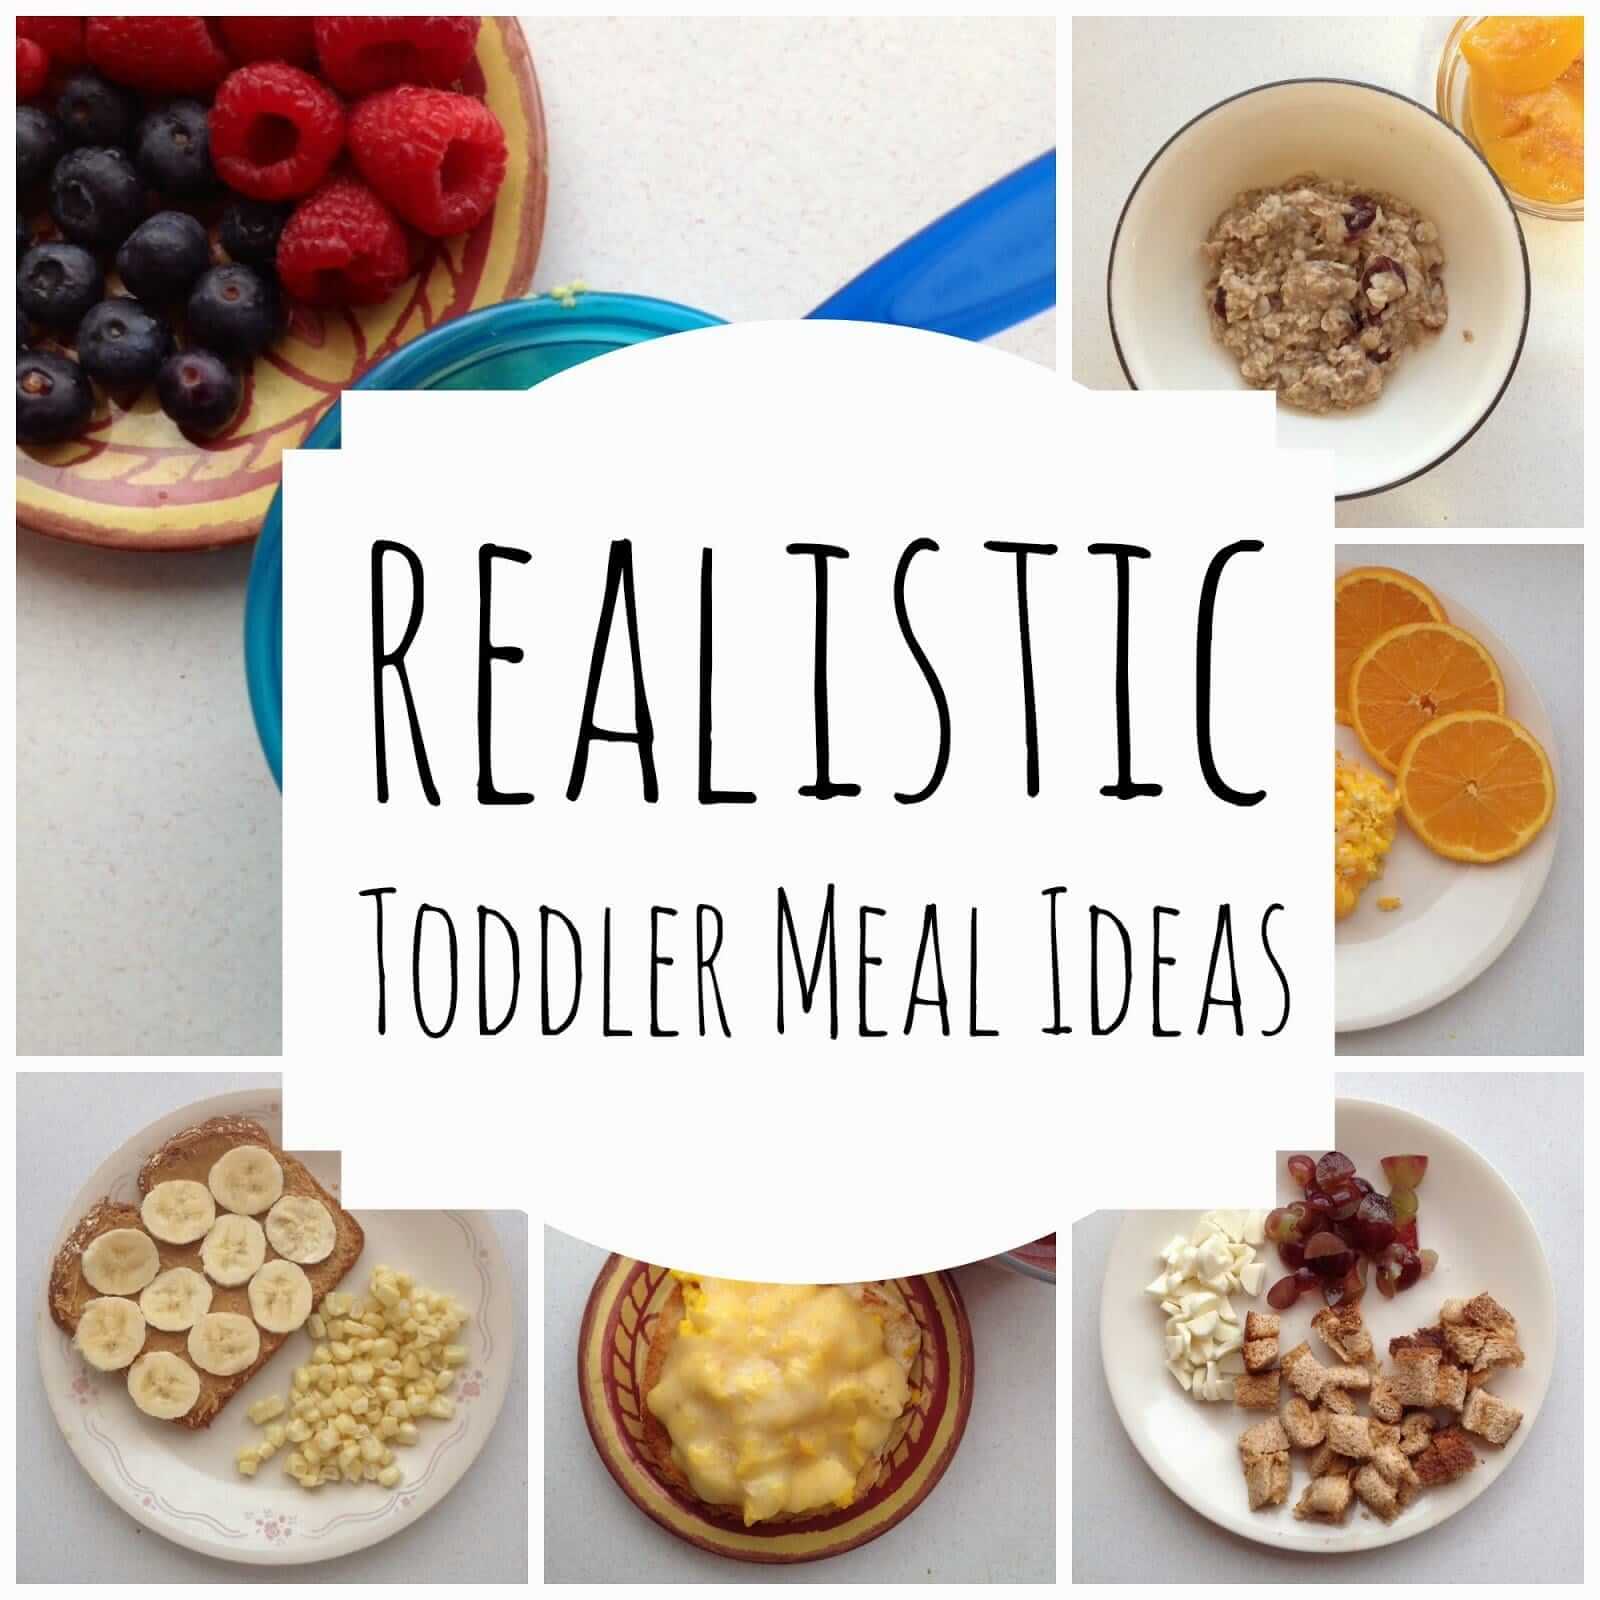 https://www.loulougirls.com/wp-content/uploads/2015/03/realistic-toddler-meal-ideas-yes.jpg